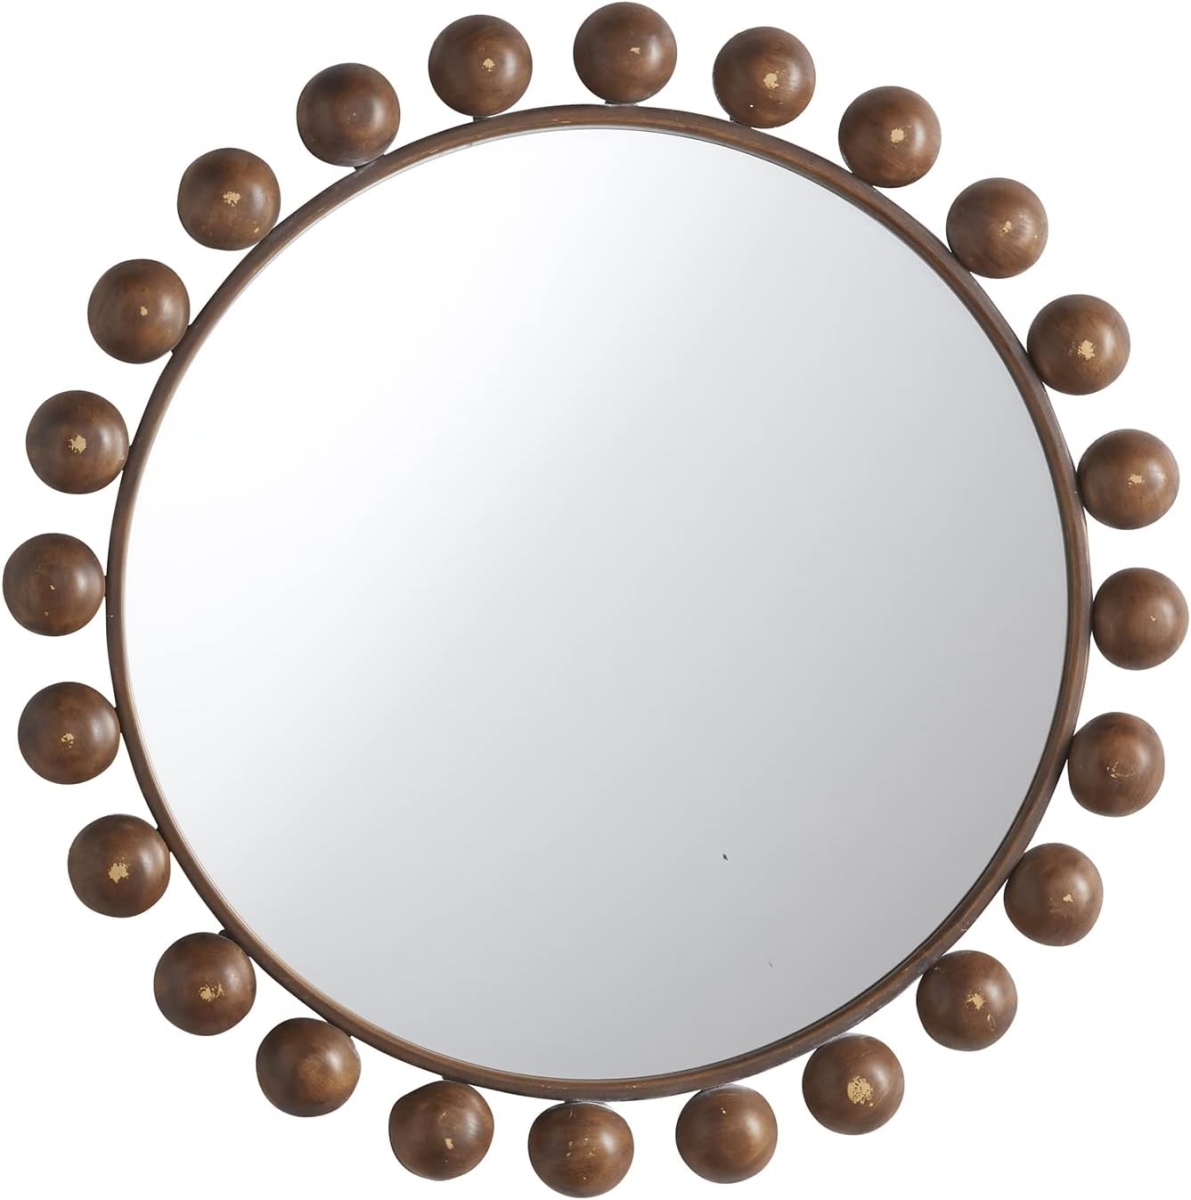 Picture of Creative Brands CMR570 Floral Rimmed Mirror - Round - Brown